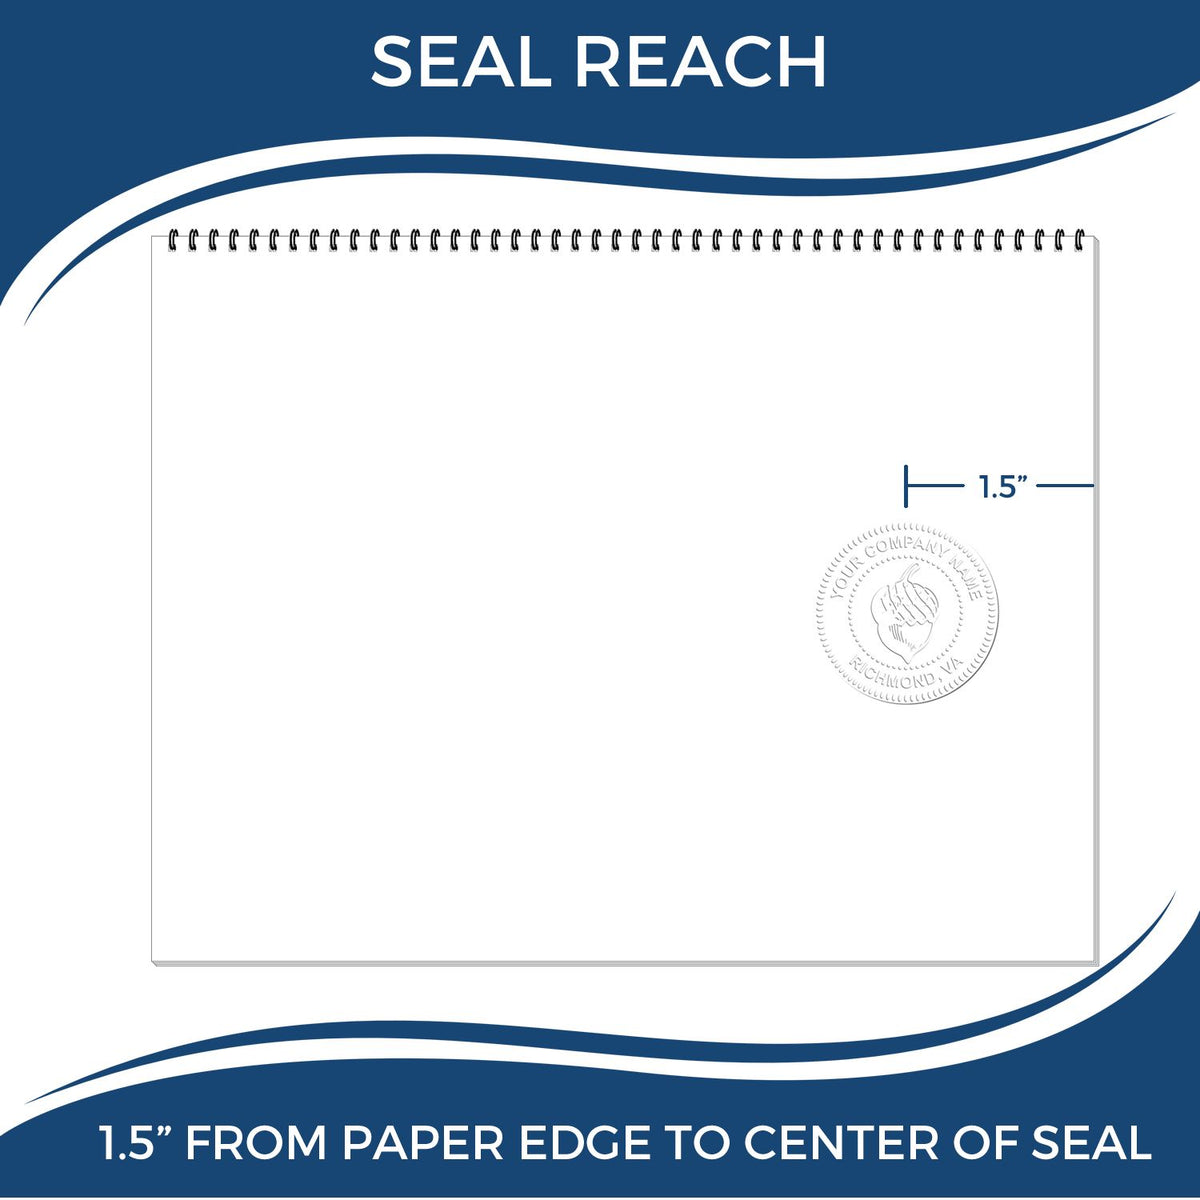 An infographic showing the seal reach which is represented by a ruler and a miniature seal image of the Handheld Maine Architect Seal Embosser